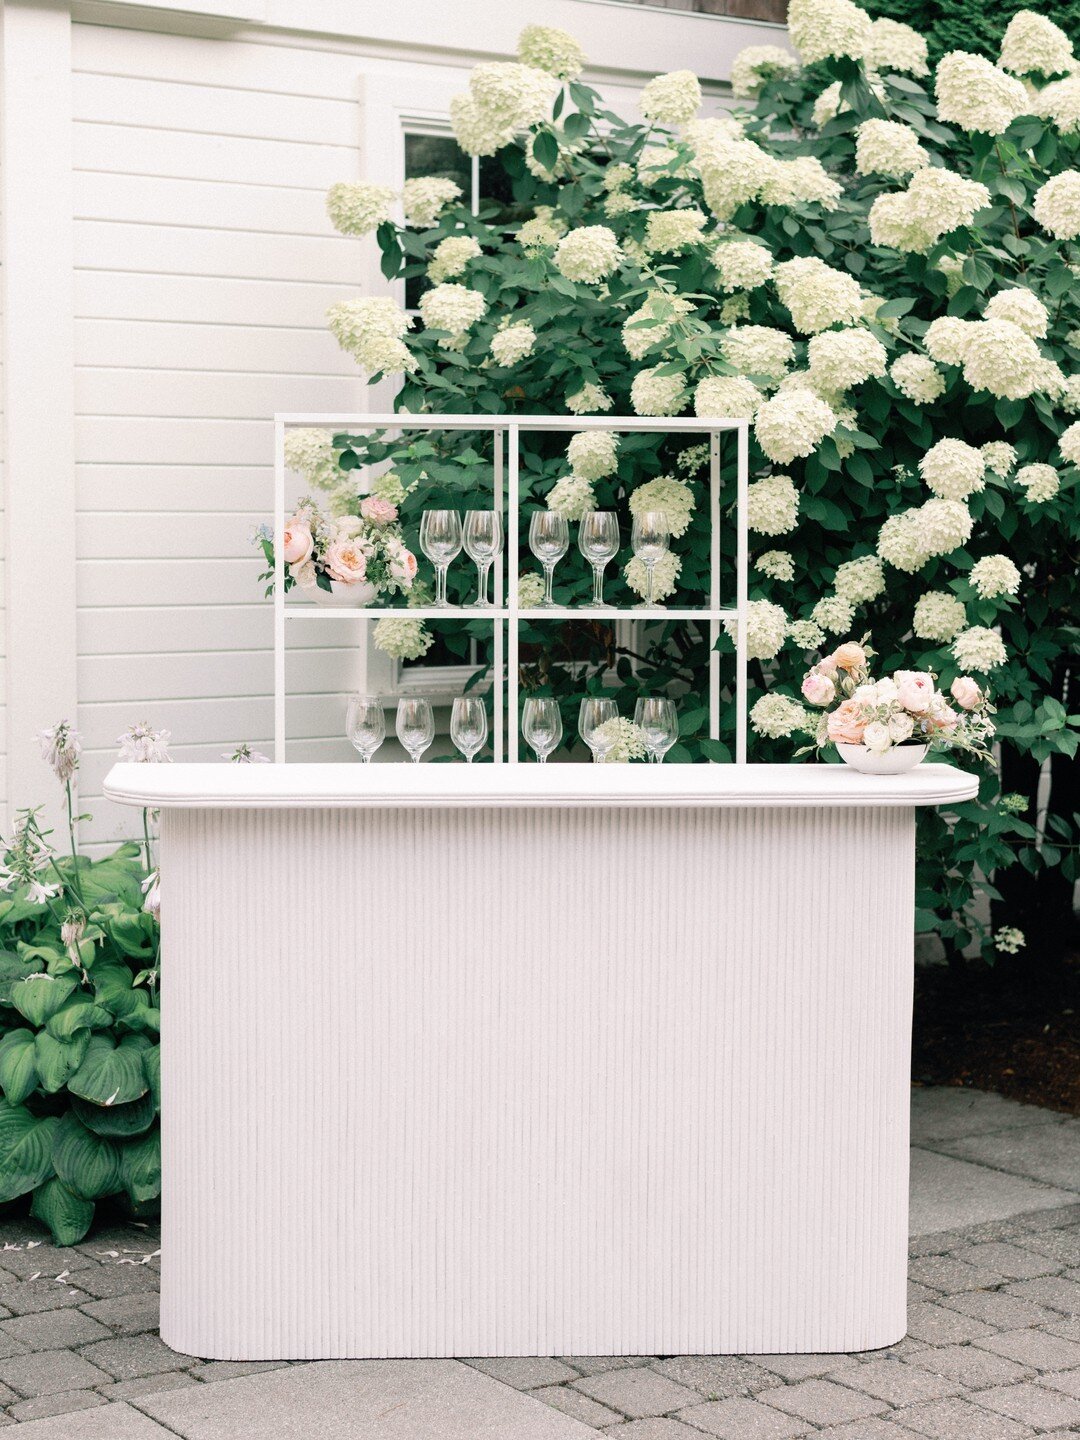 Cheers to the long weekend! Our one of a kind Celeste Bar surrounded by hydrangeas really takes the &quot;hedge&quot; off....⁣
Photography @jacquelinebenetphoto
Planning, Design, and Floral @roseandrewevents
Venue @foxhollow_events 
H&amp;MU @jenlage